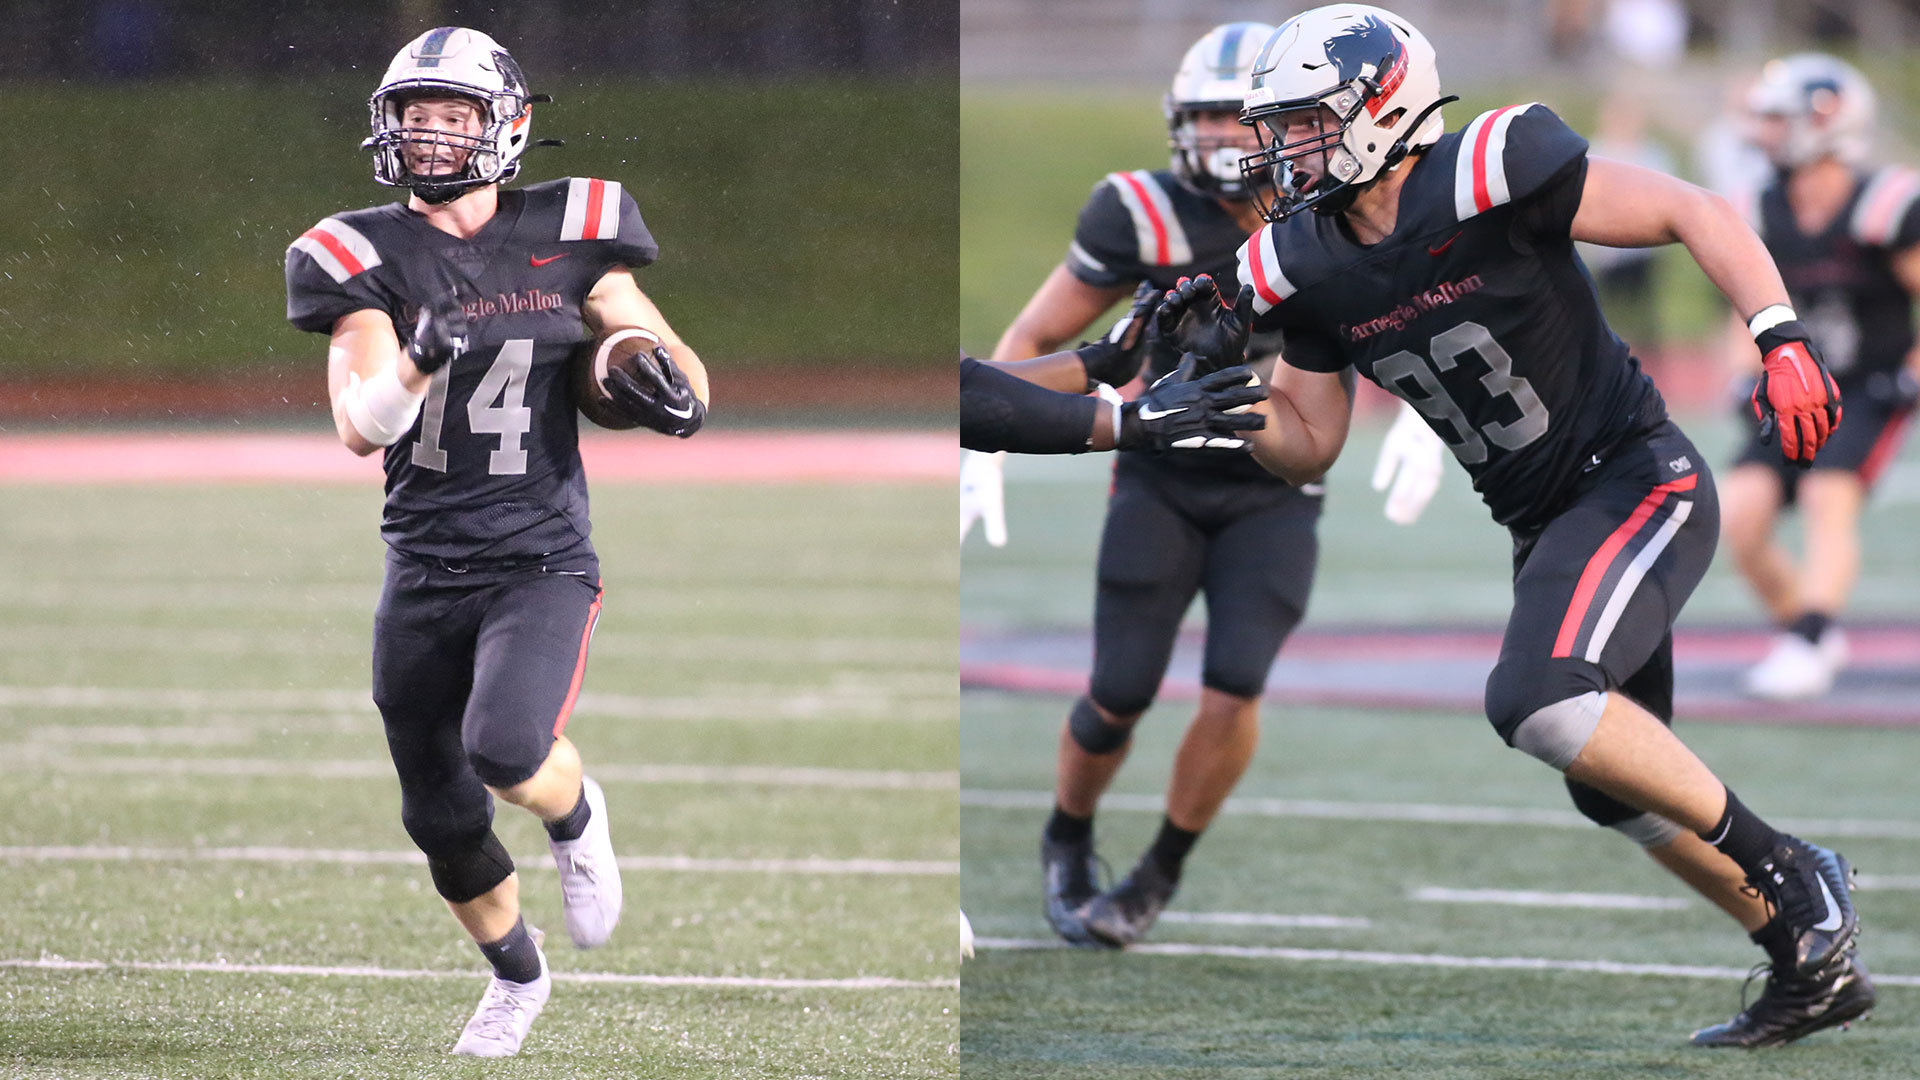 Pitsenberger Named PAC Defensive Player of the Week; Stokey Honored by D3football.com